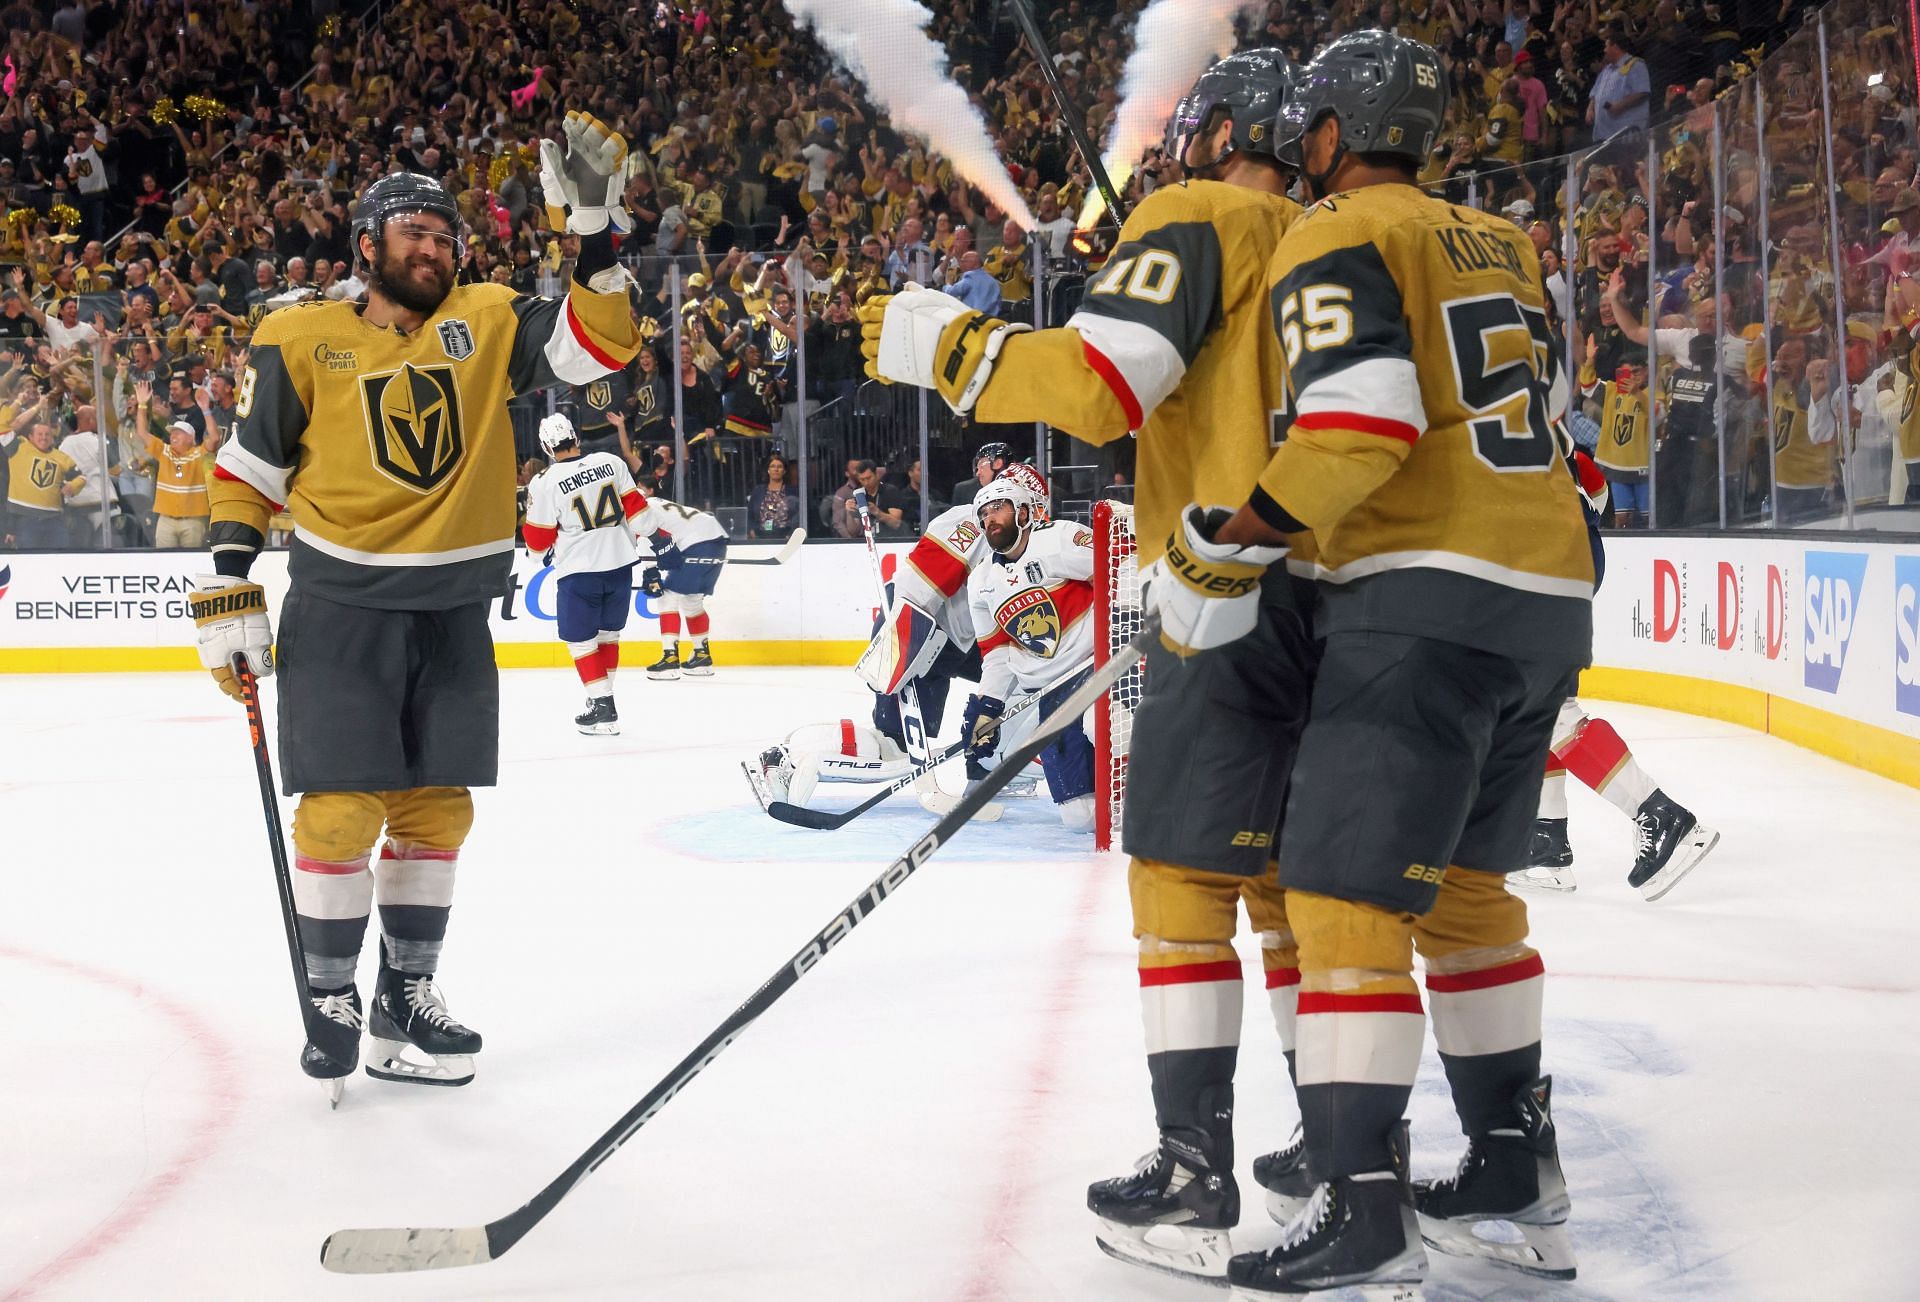 NHL confirms Golden Knights will play an outdoor game